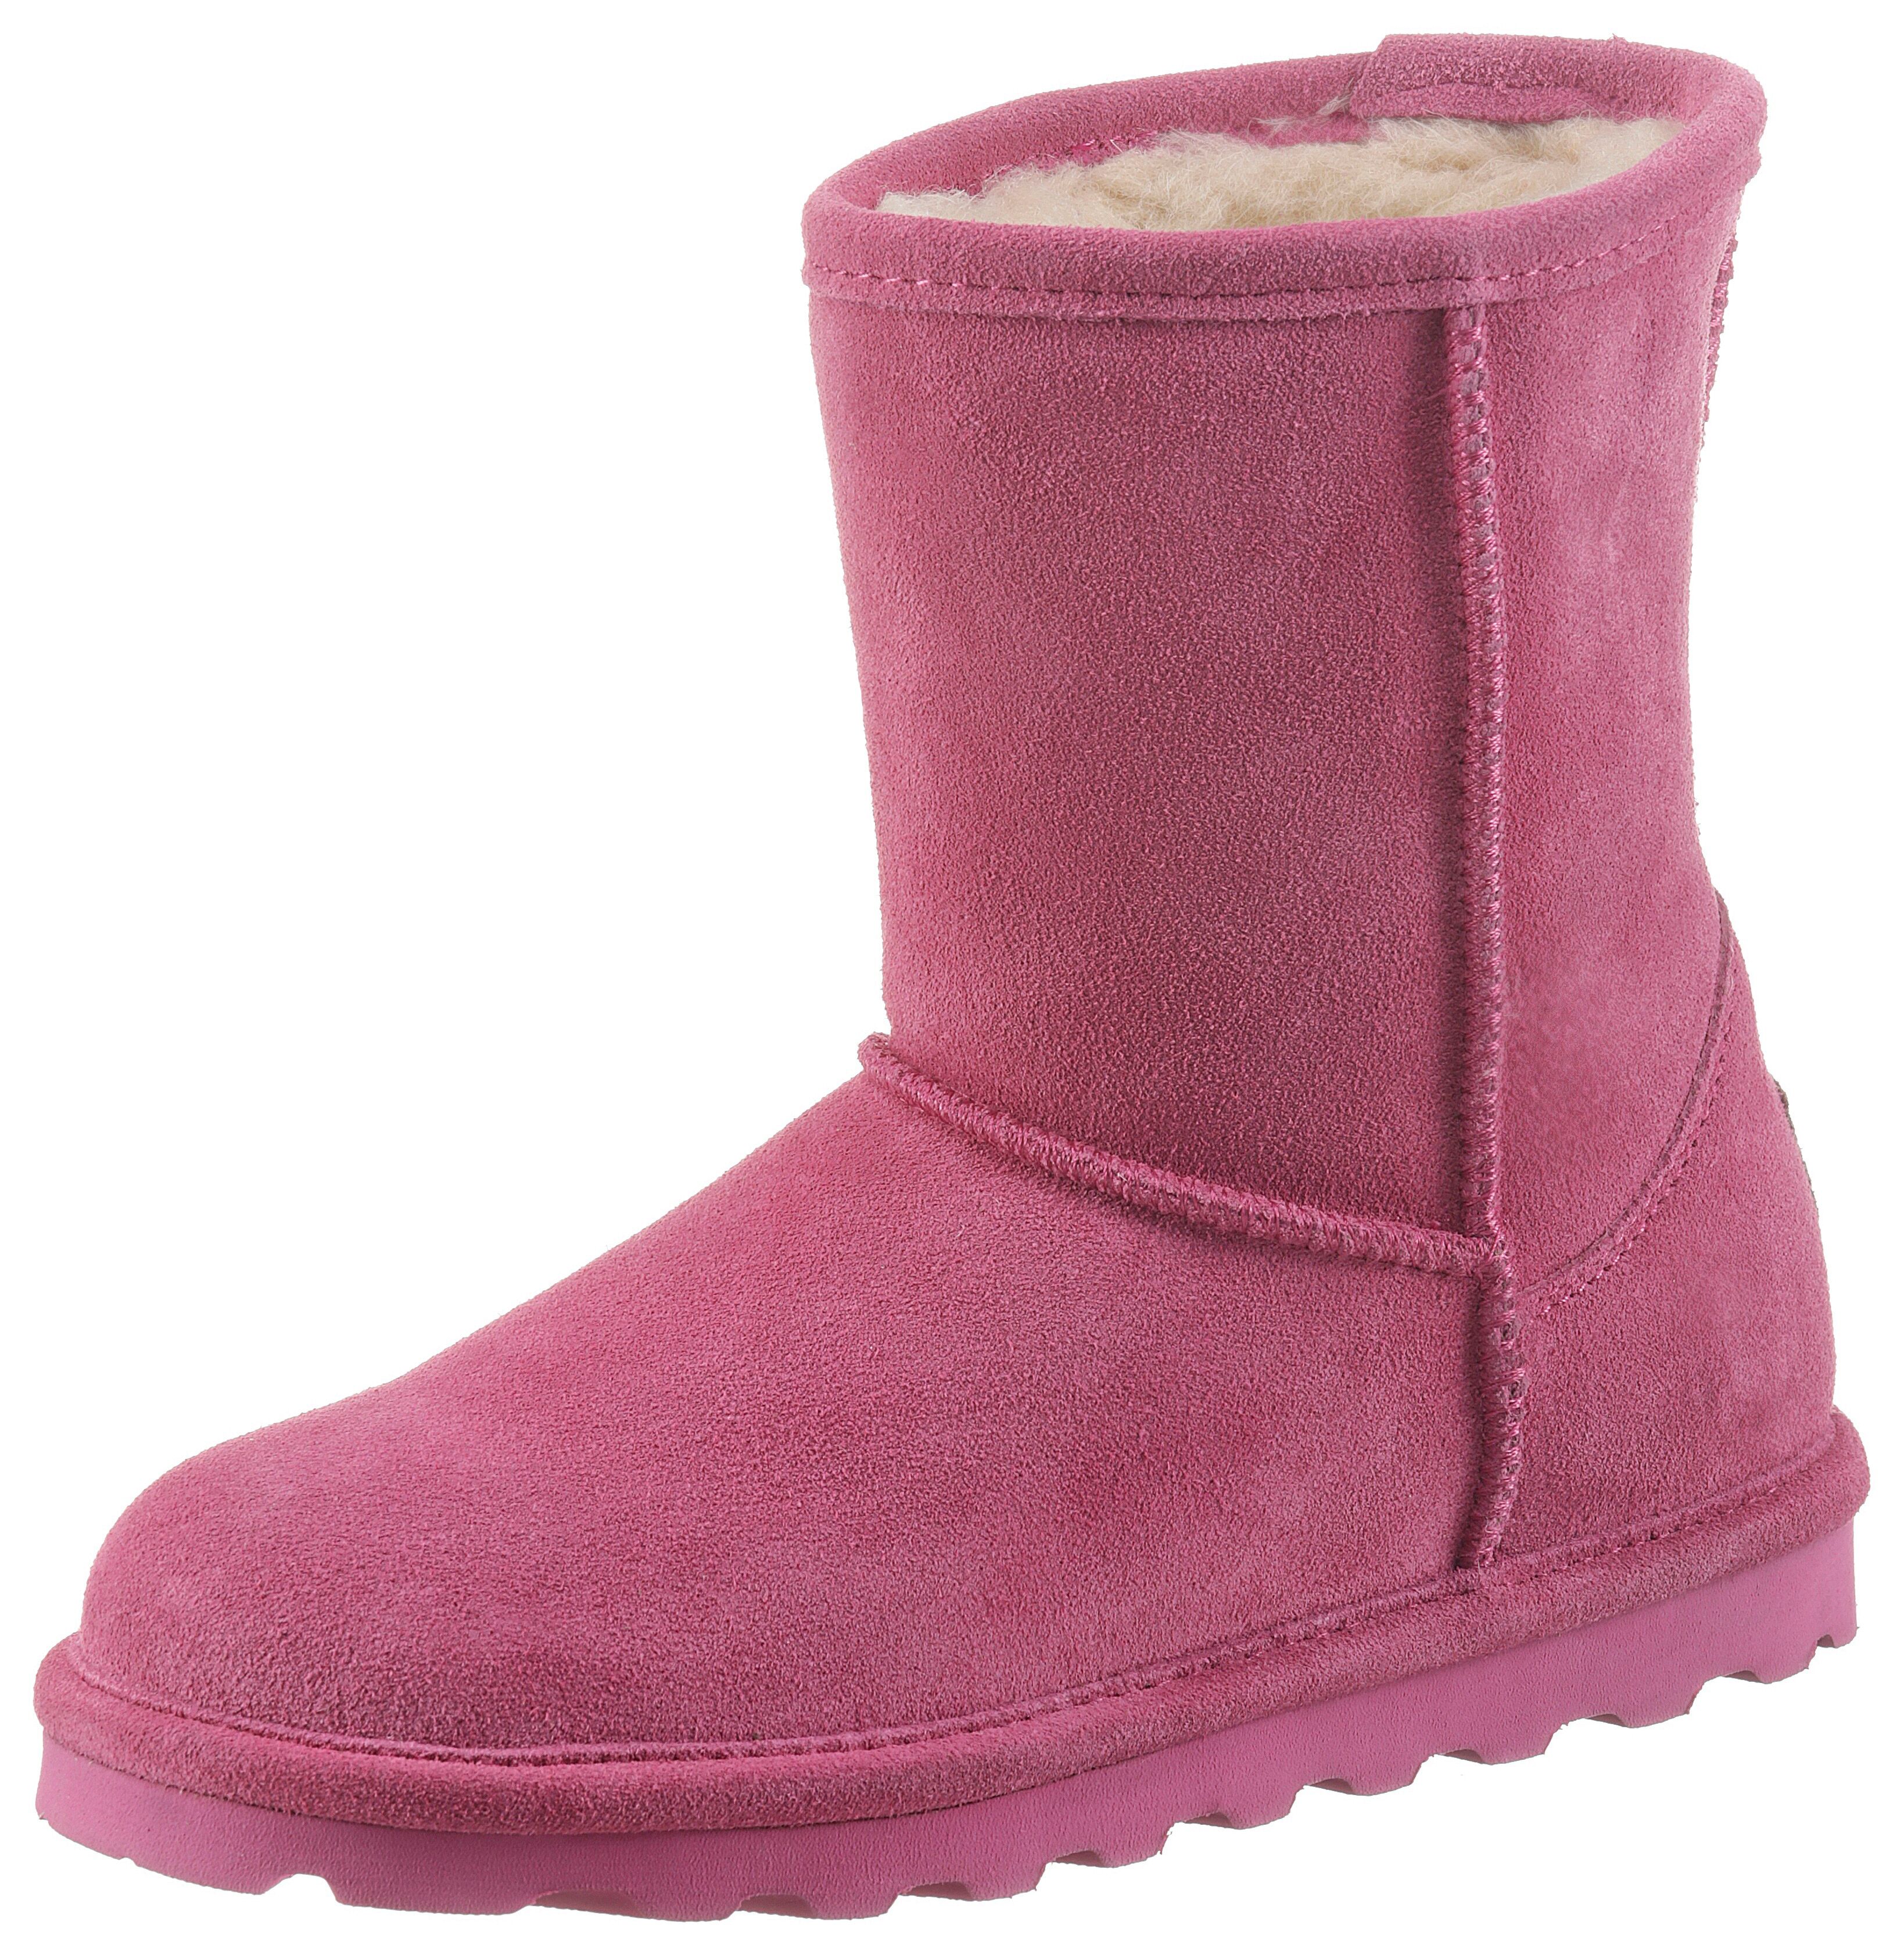 Winterboots BEARPAW "ELLE YOUTH" Gr. 33, pink Kinder Schuhe Stiefel Boots